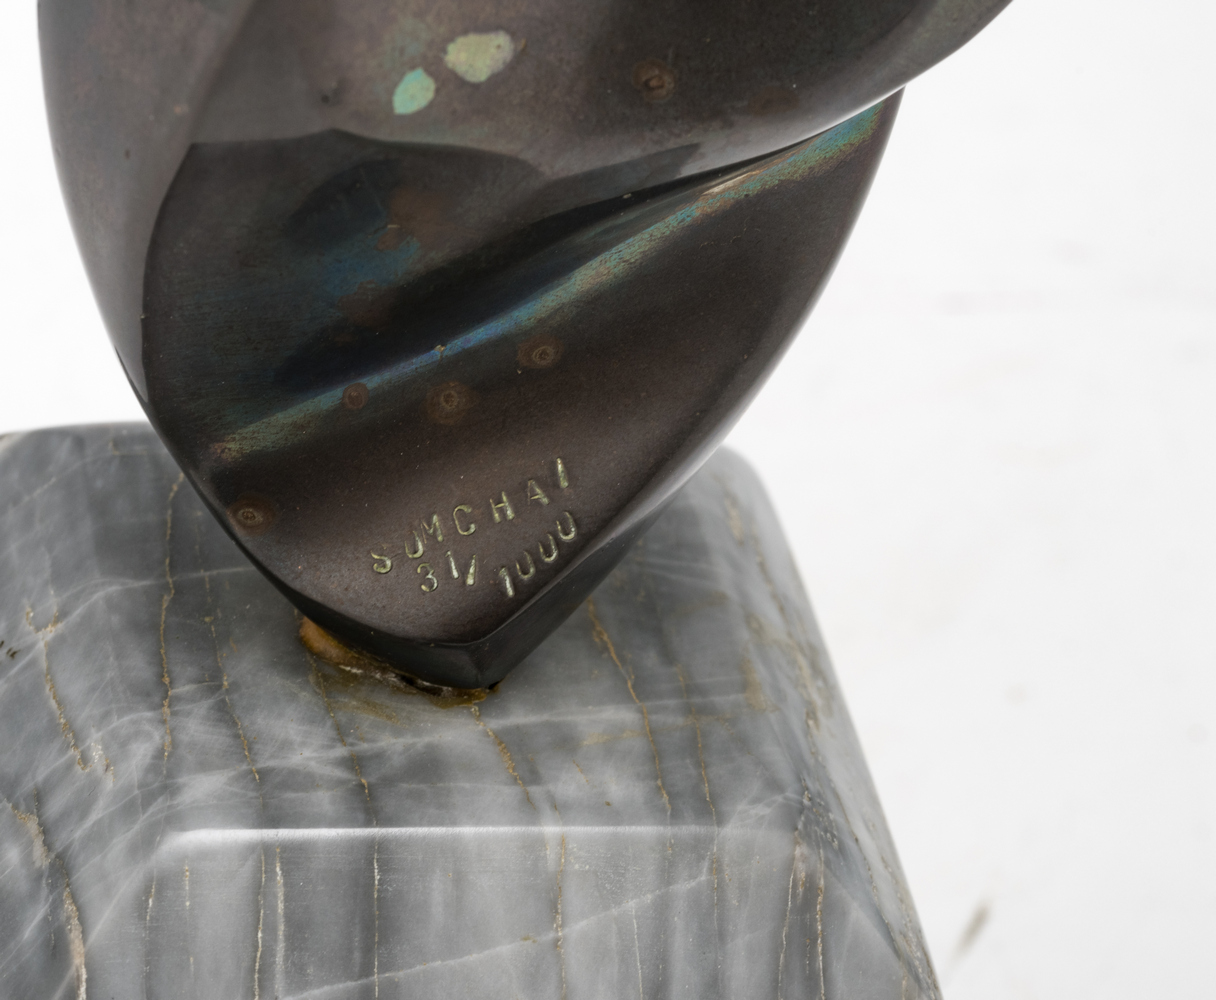 Somchai, untitled, patinated bronze, on a Nordic imperial marble base, no. 31/100, H 22 cm - Image 3 of 4